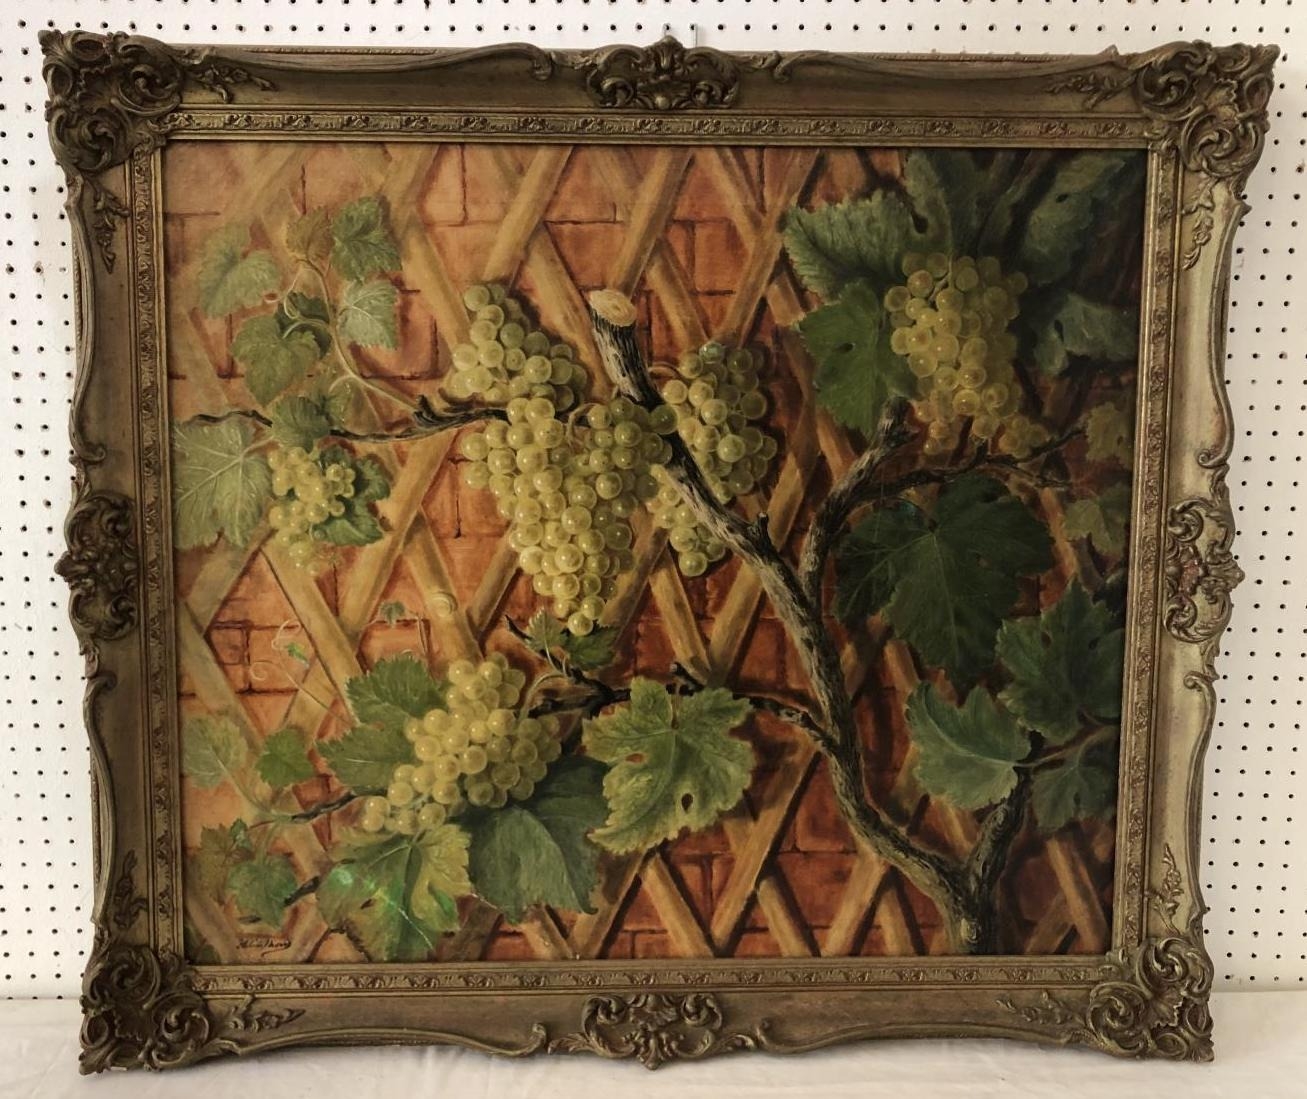 Early 20th Century - Grapes on the vine, indistinctly signed 'Helene Nisa...?' lower left, oil on